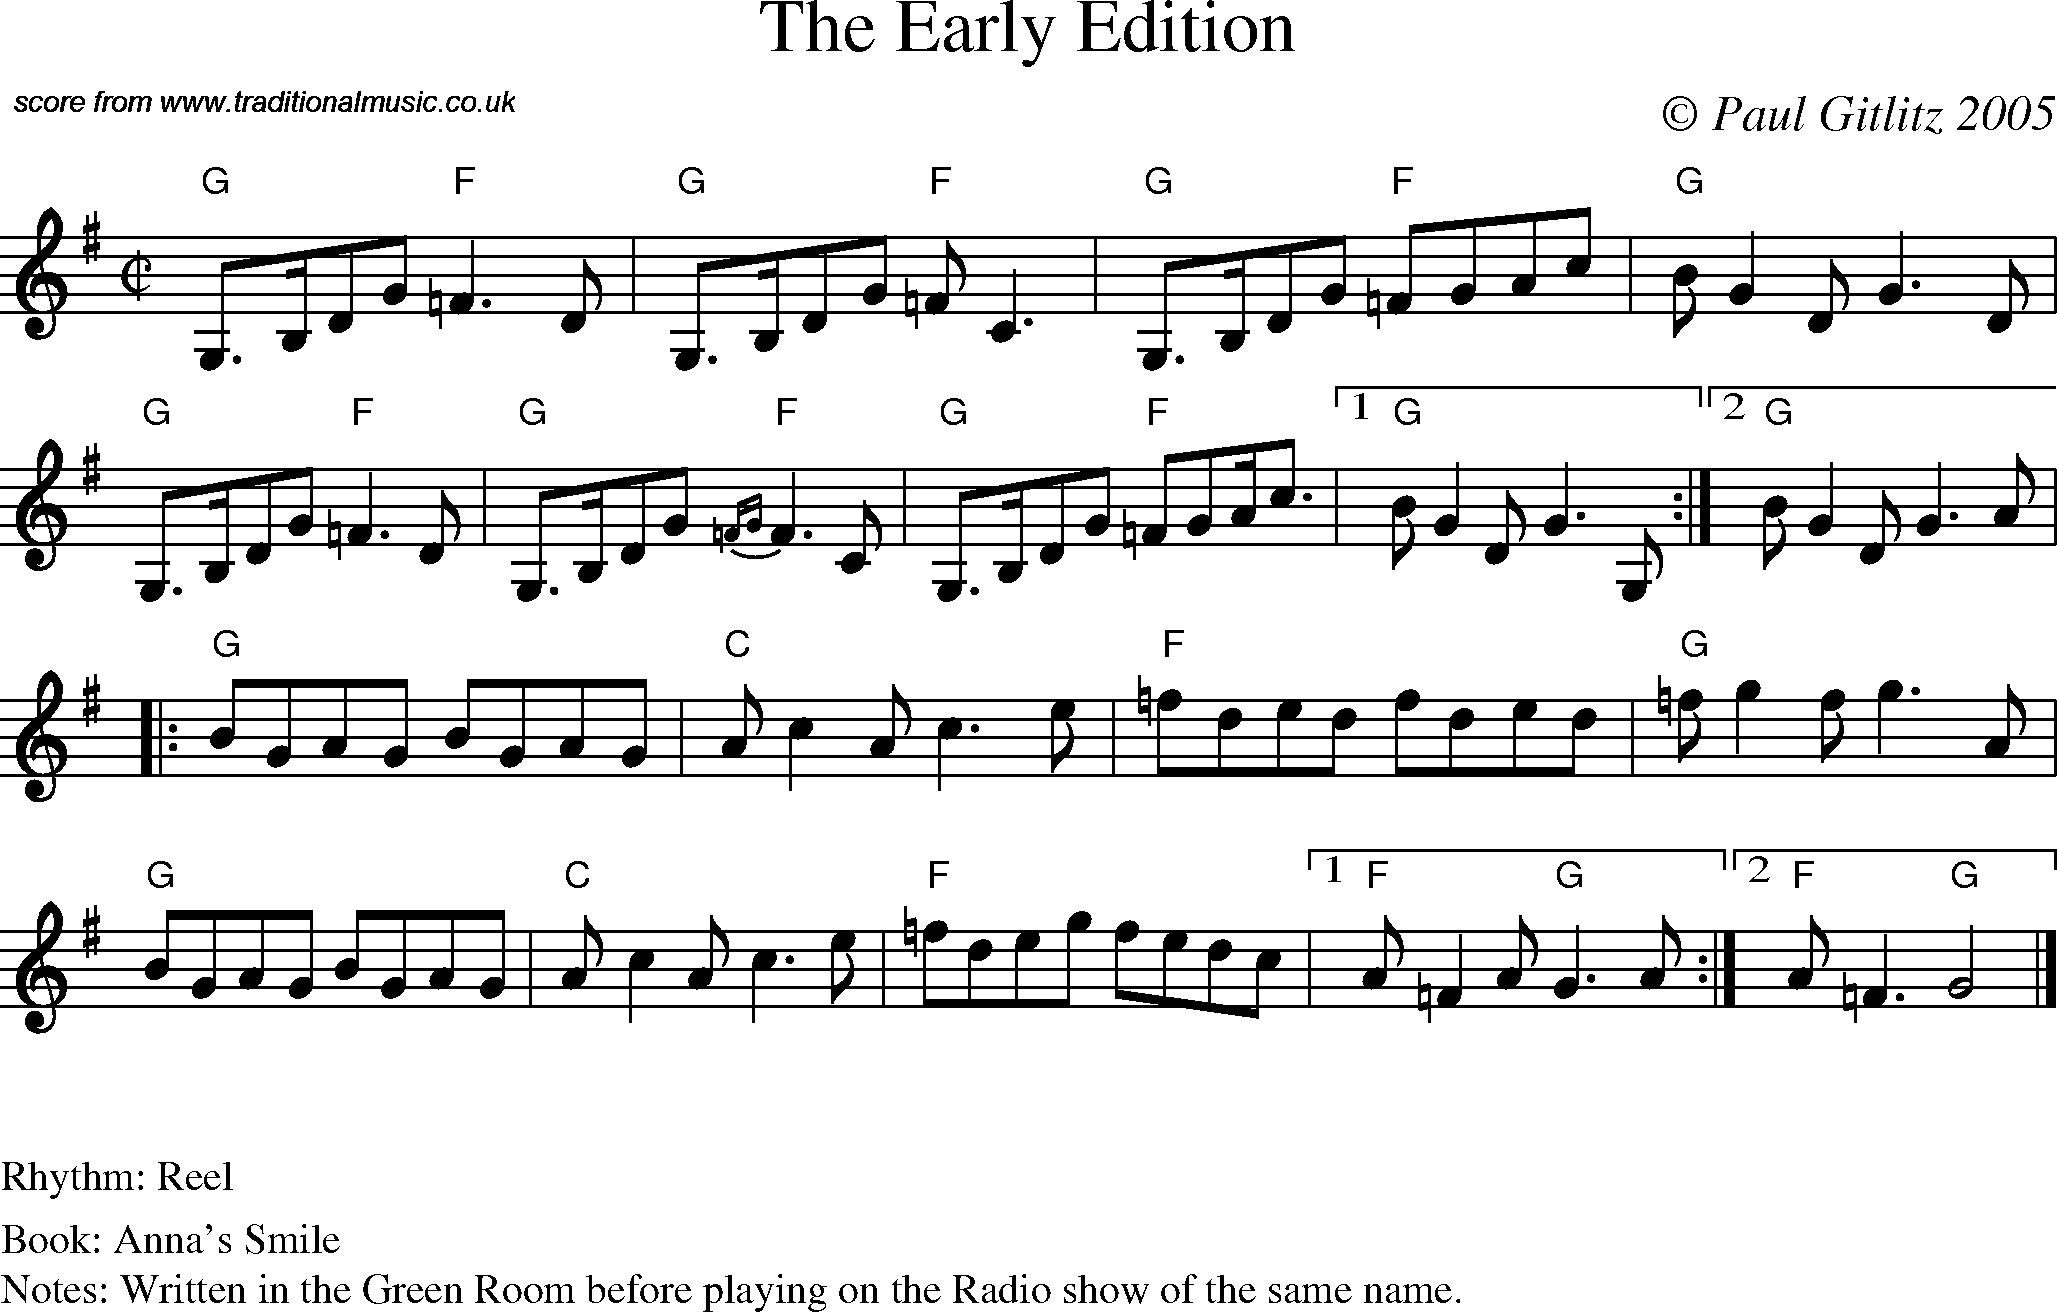 Sheet Music Score for Reel - The Early Edition